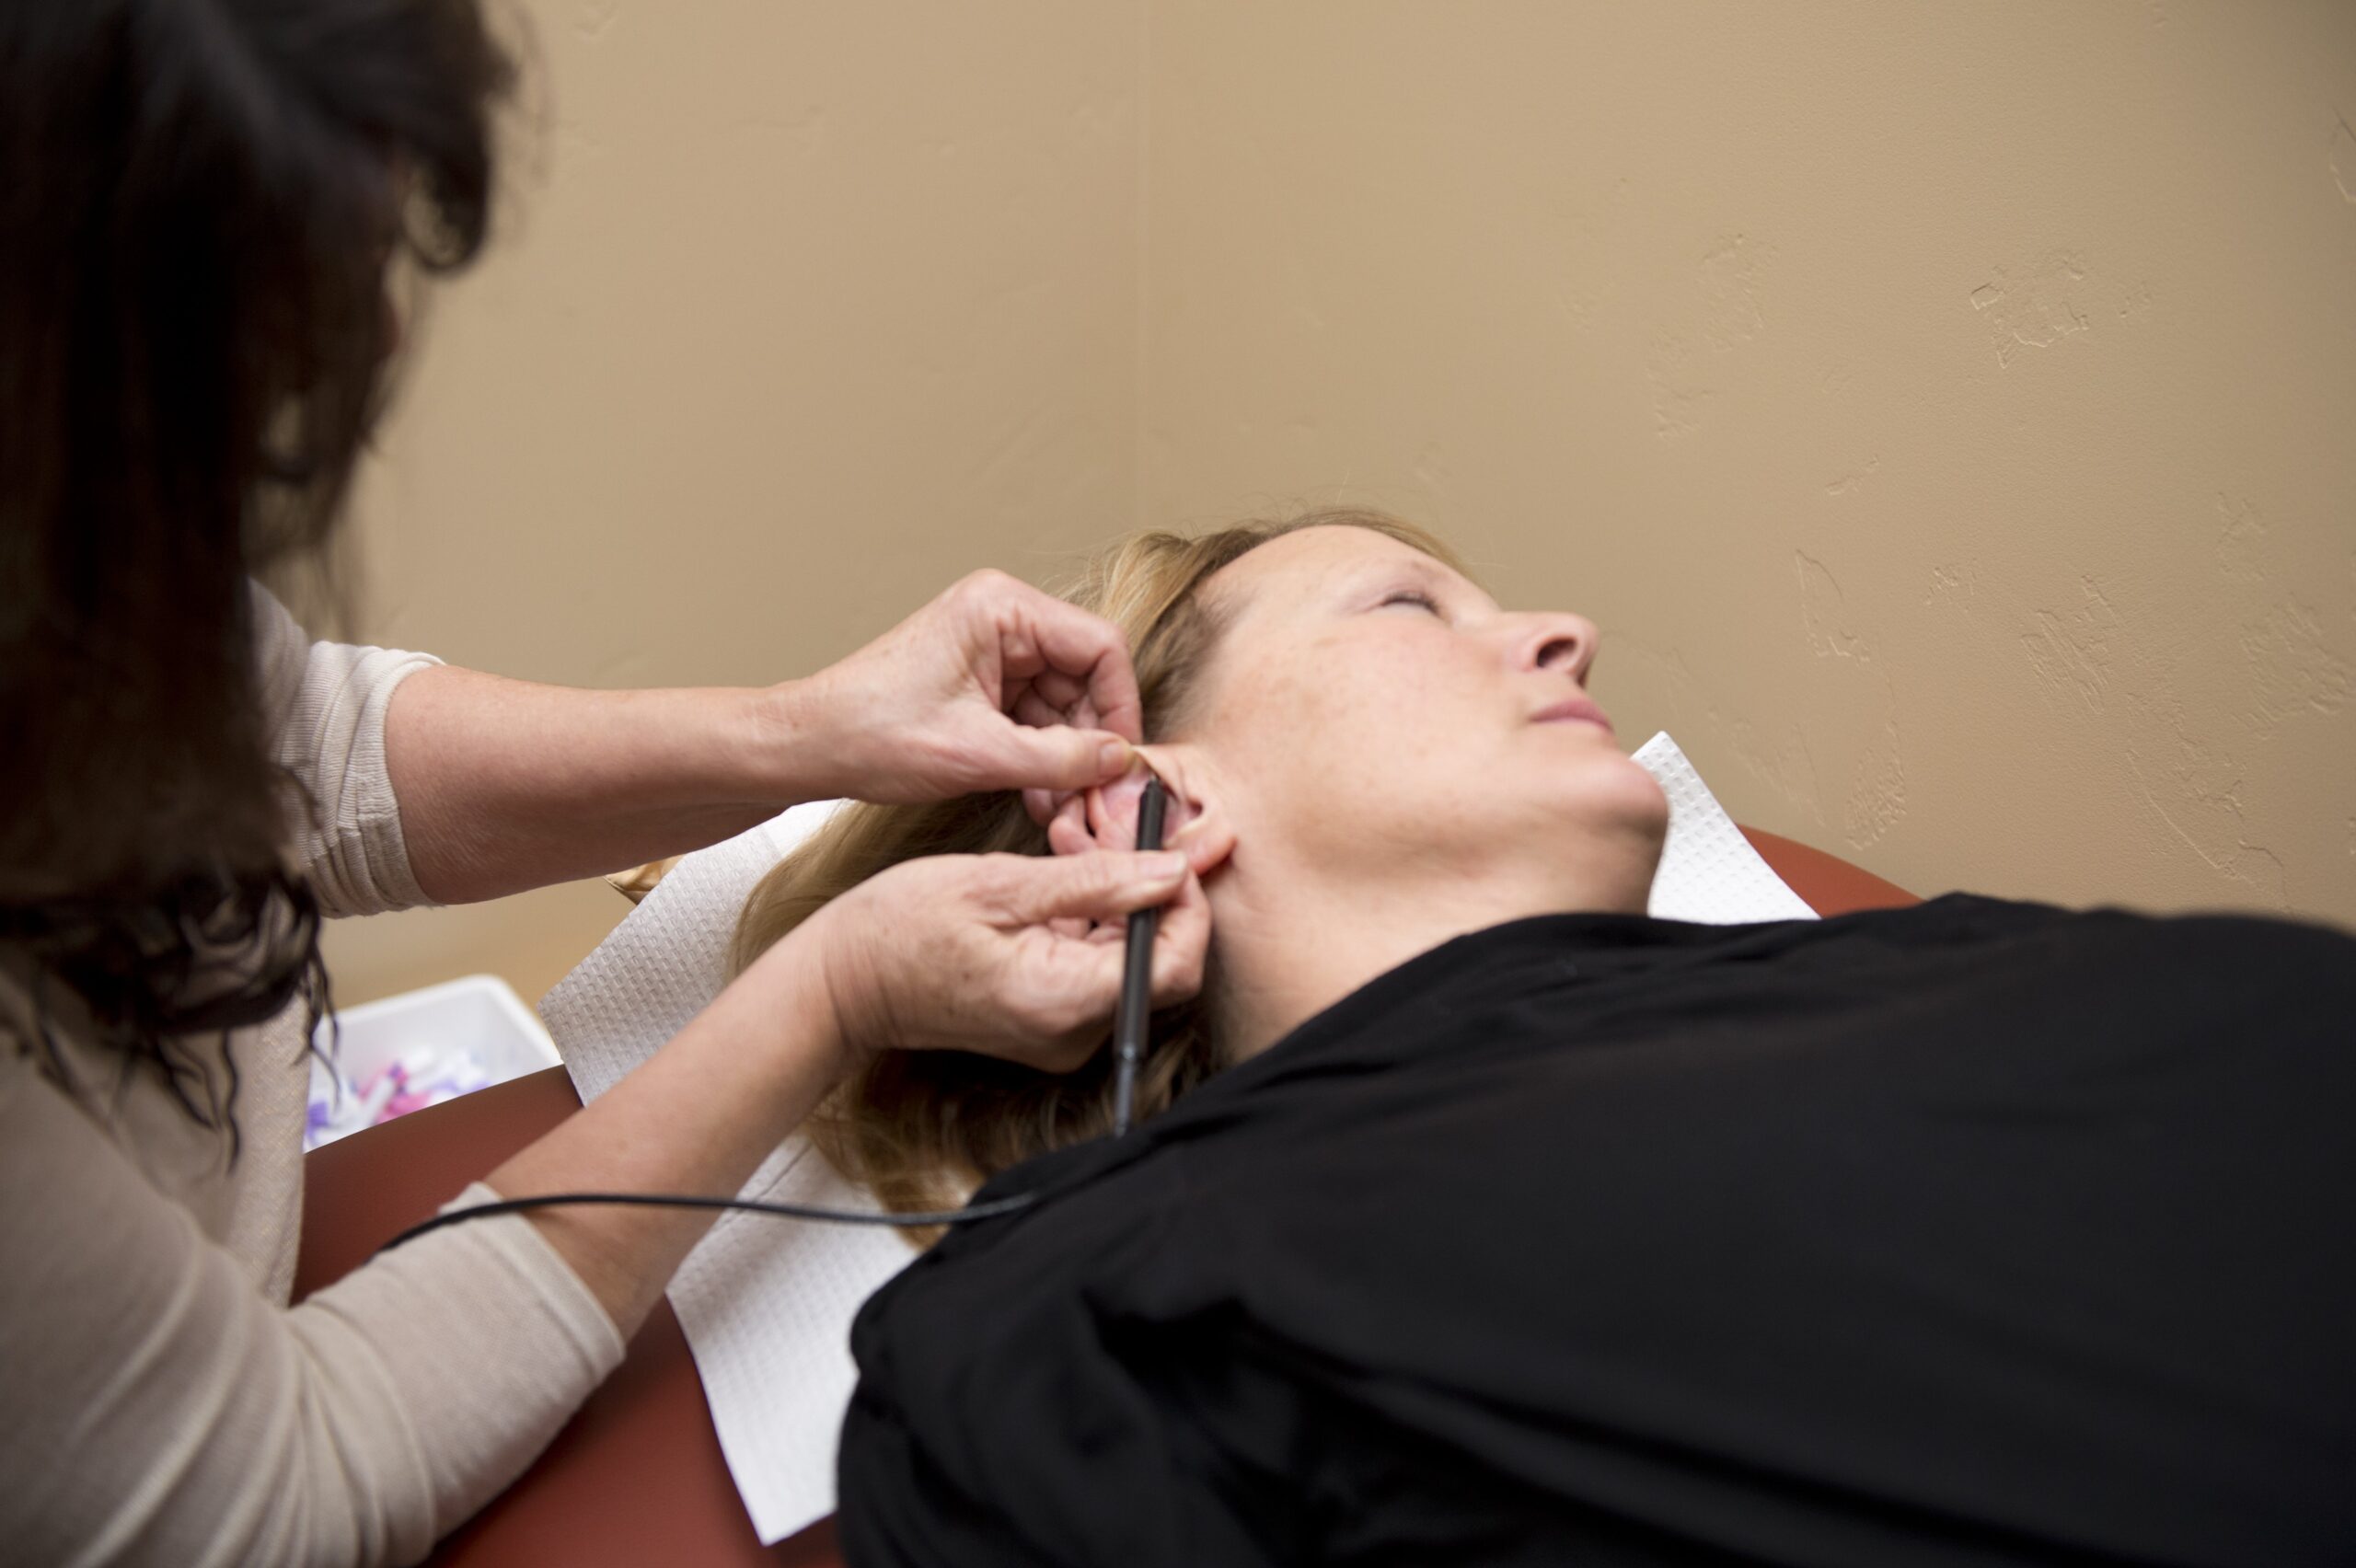 A patient undergoes auriculotherapy at the Karlfeldt Center of Idaho.